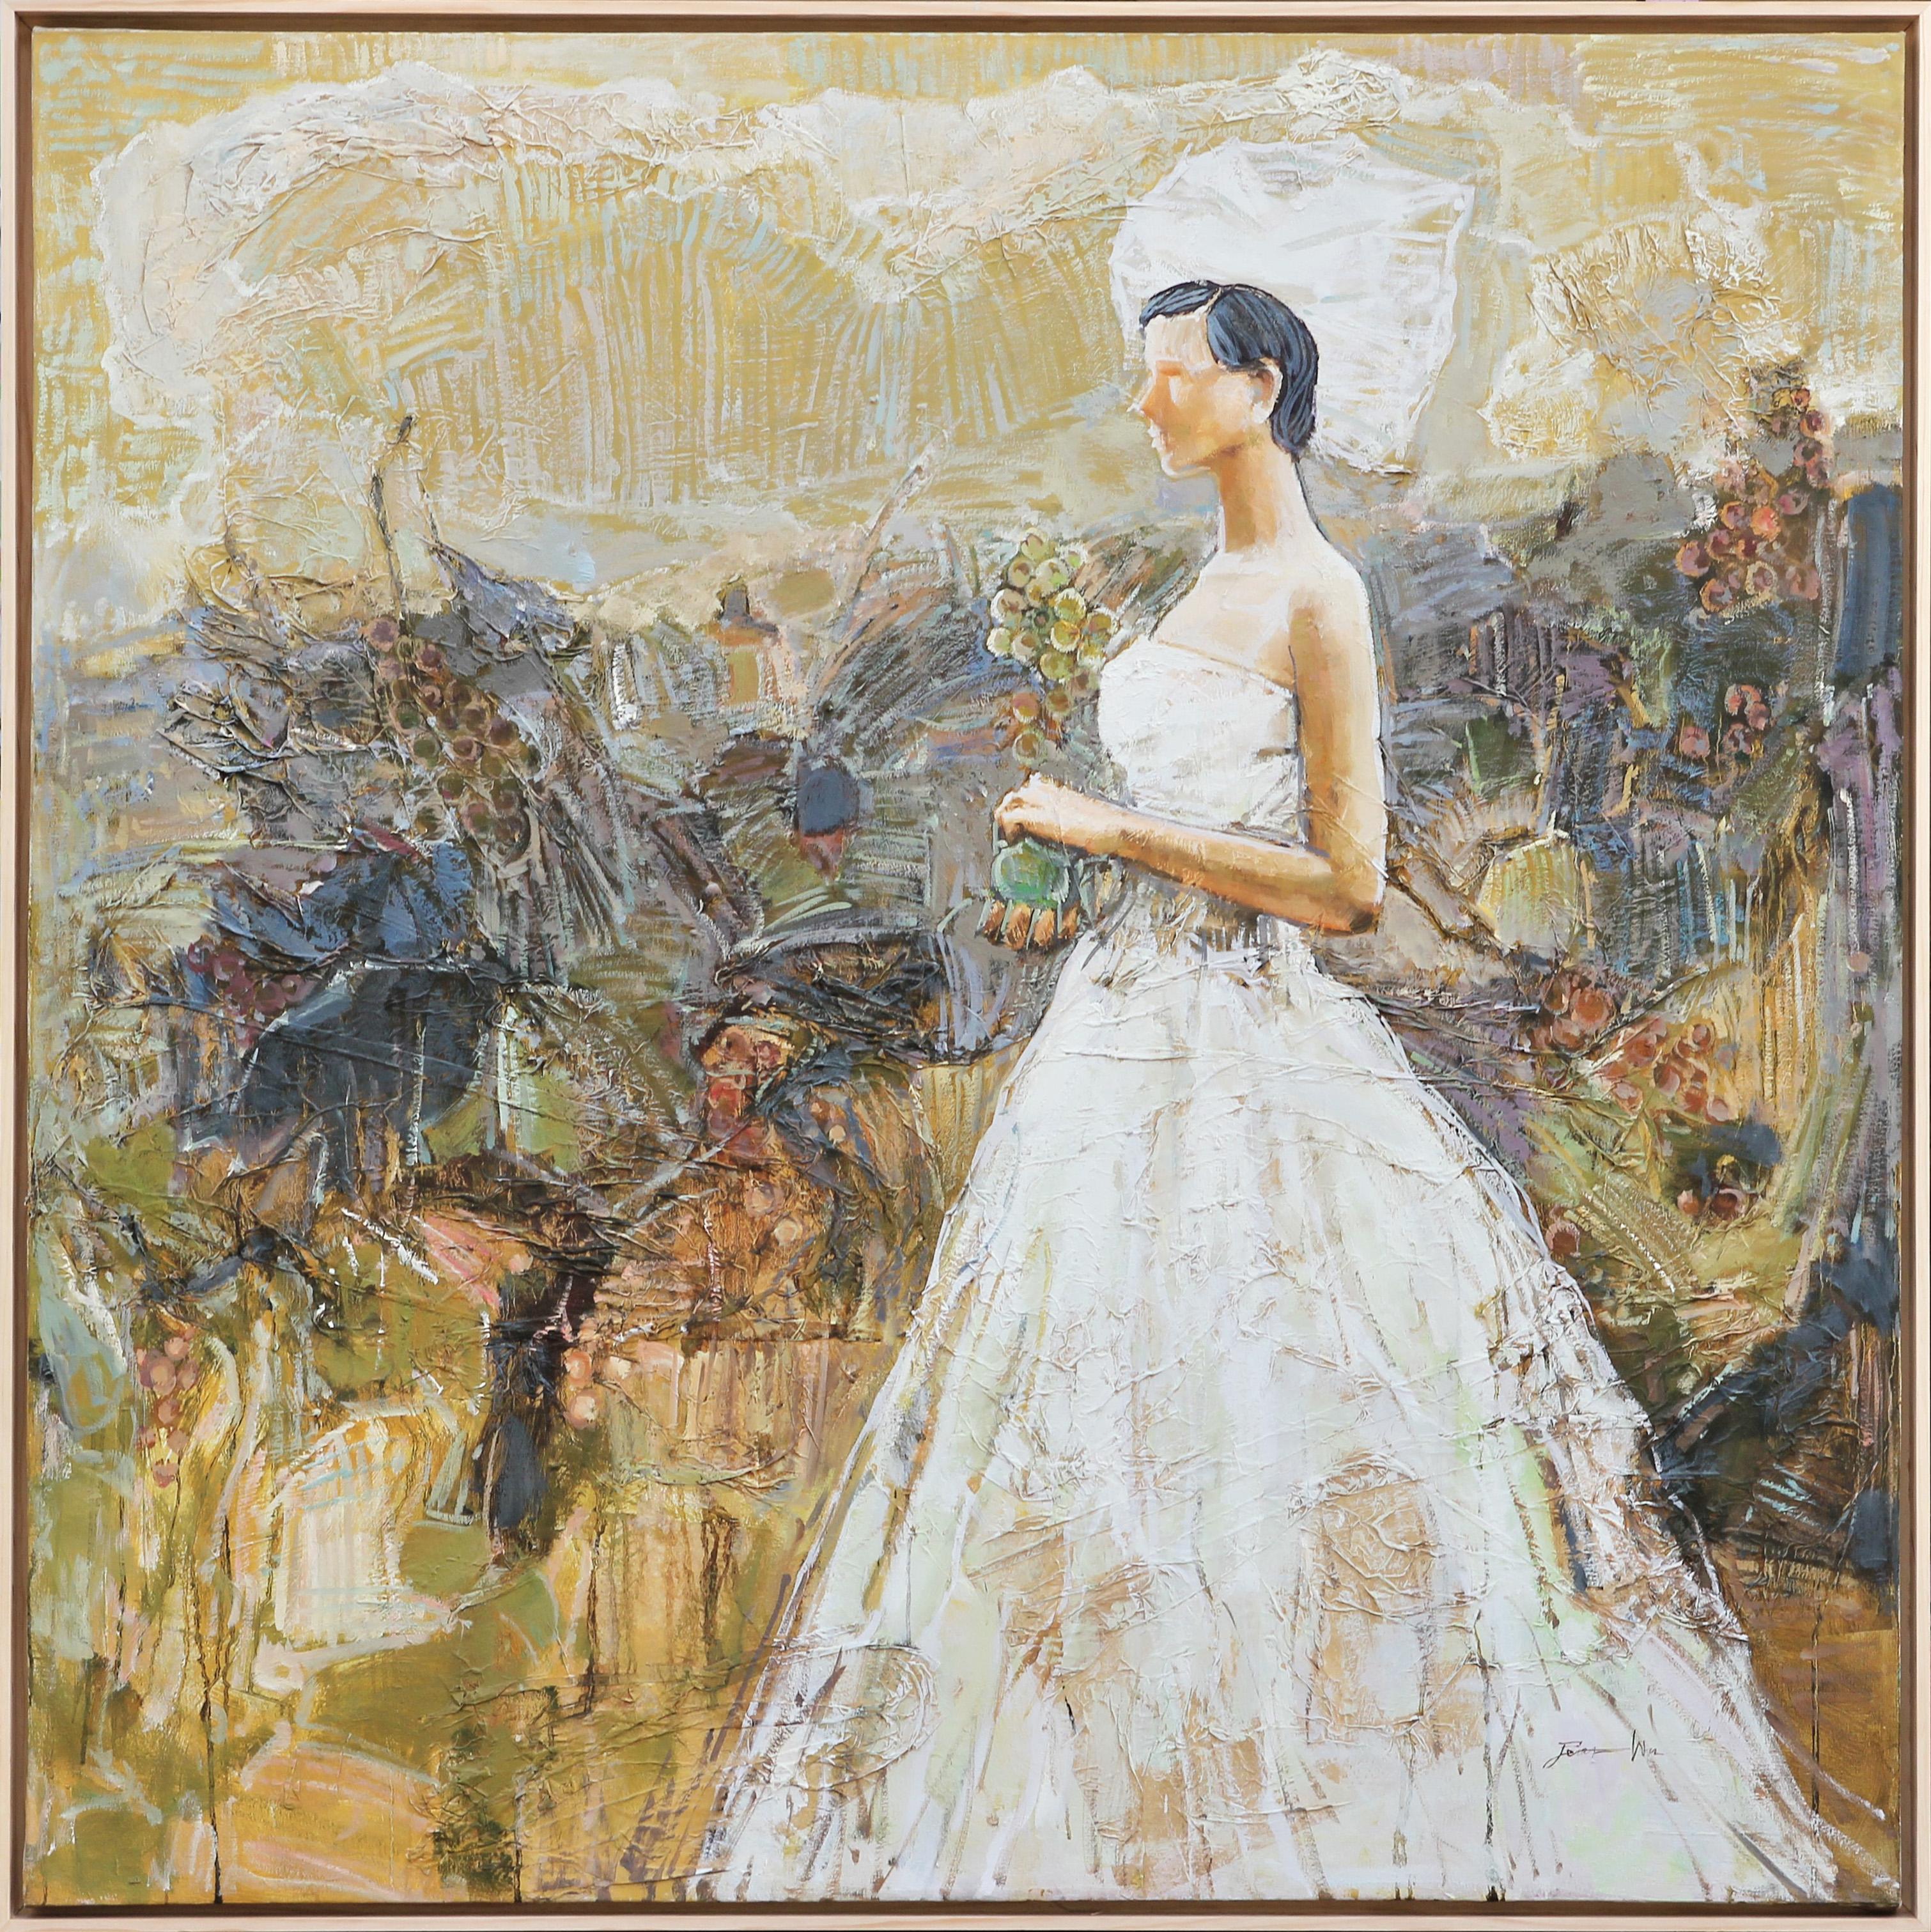 Peter Wu Figurative Painting - "Fruit of Life" Large Abstract Earth Toned Portrait of a Bride in a White Dress